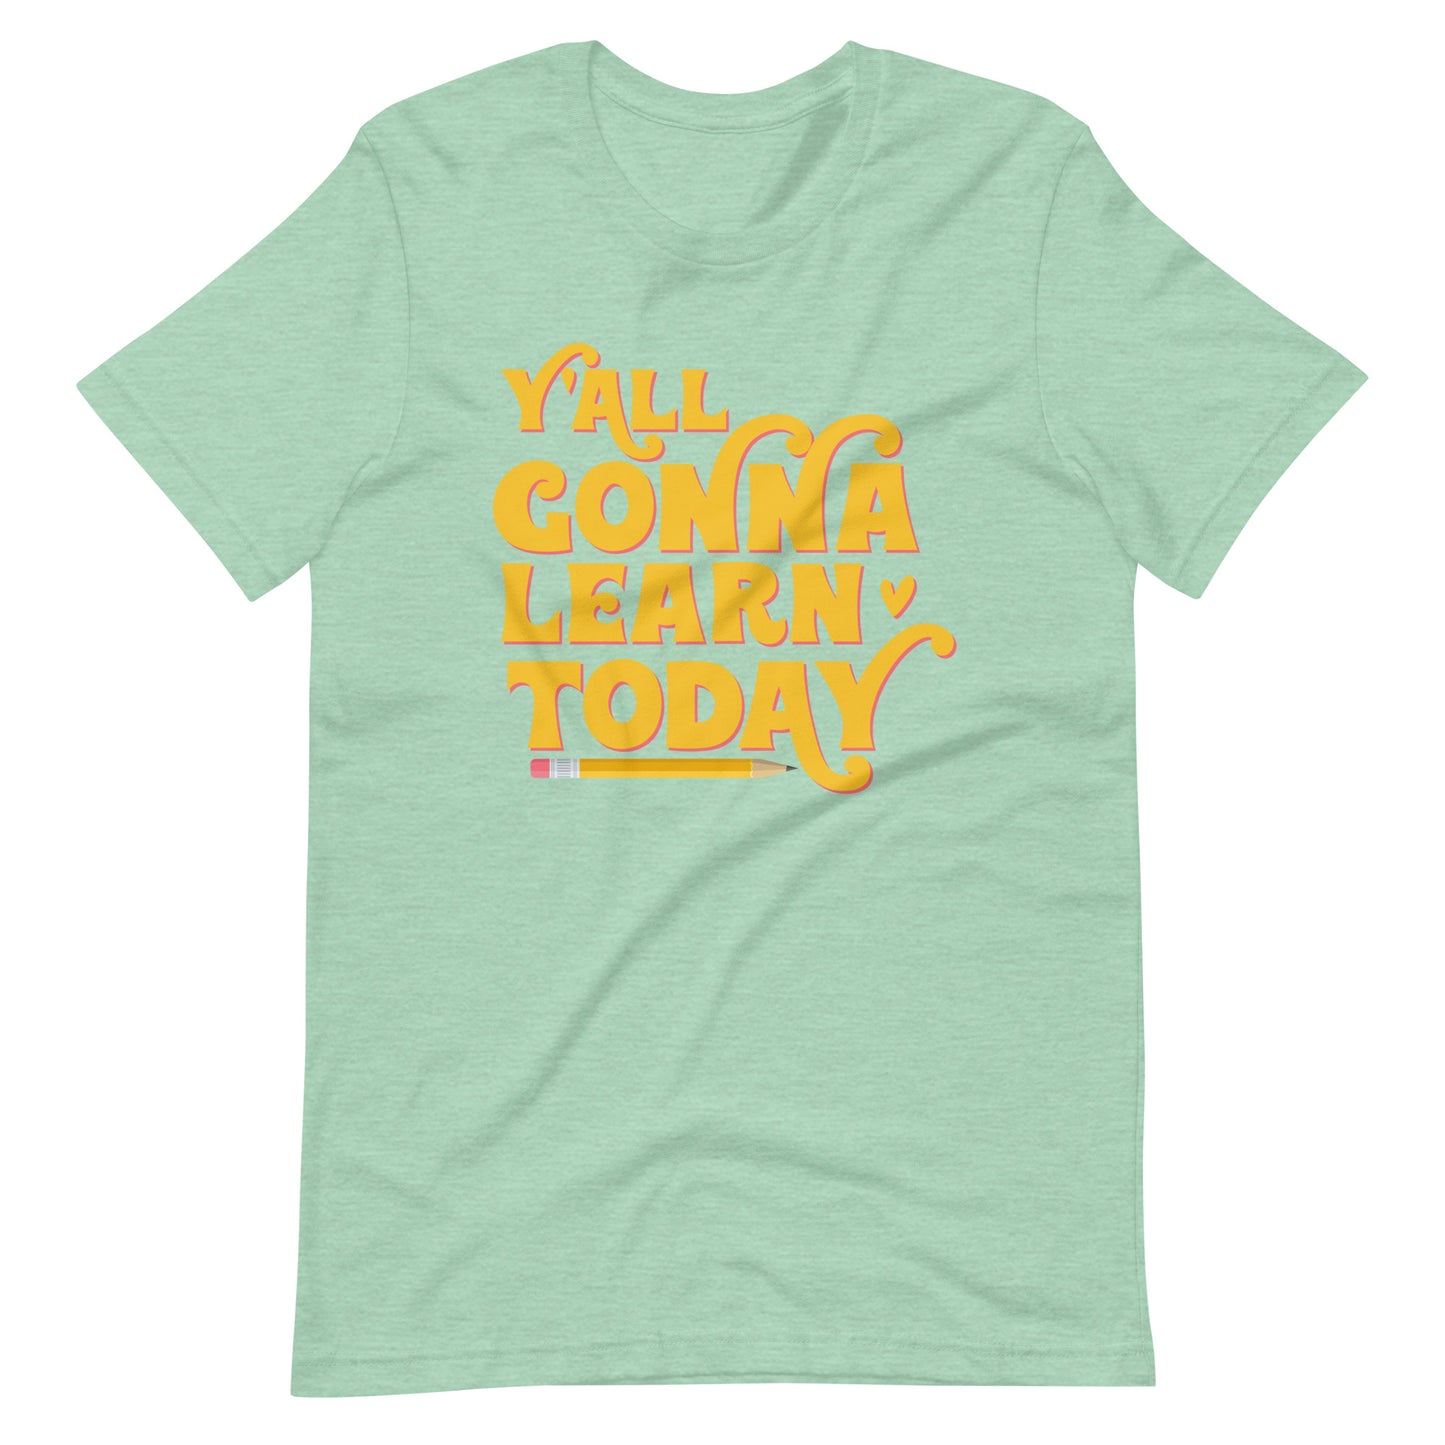 Y'all Gonna Learn Today - T-Shirt